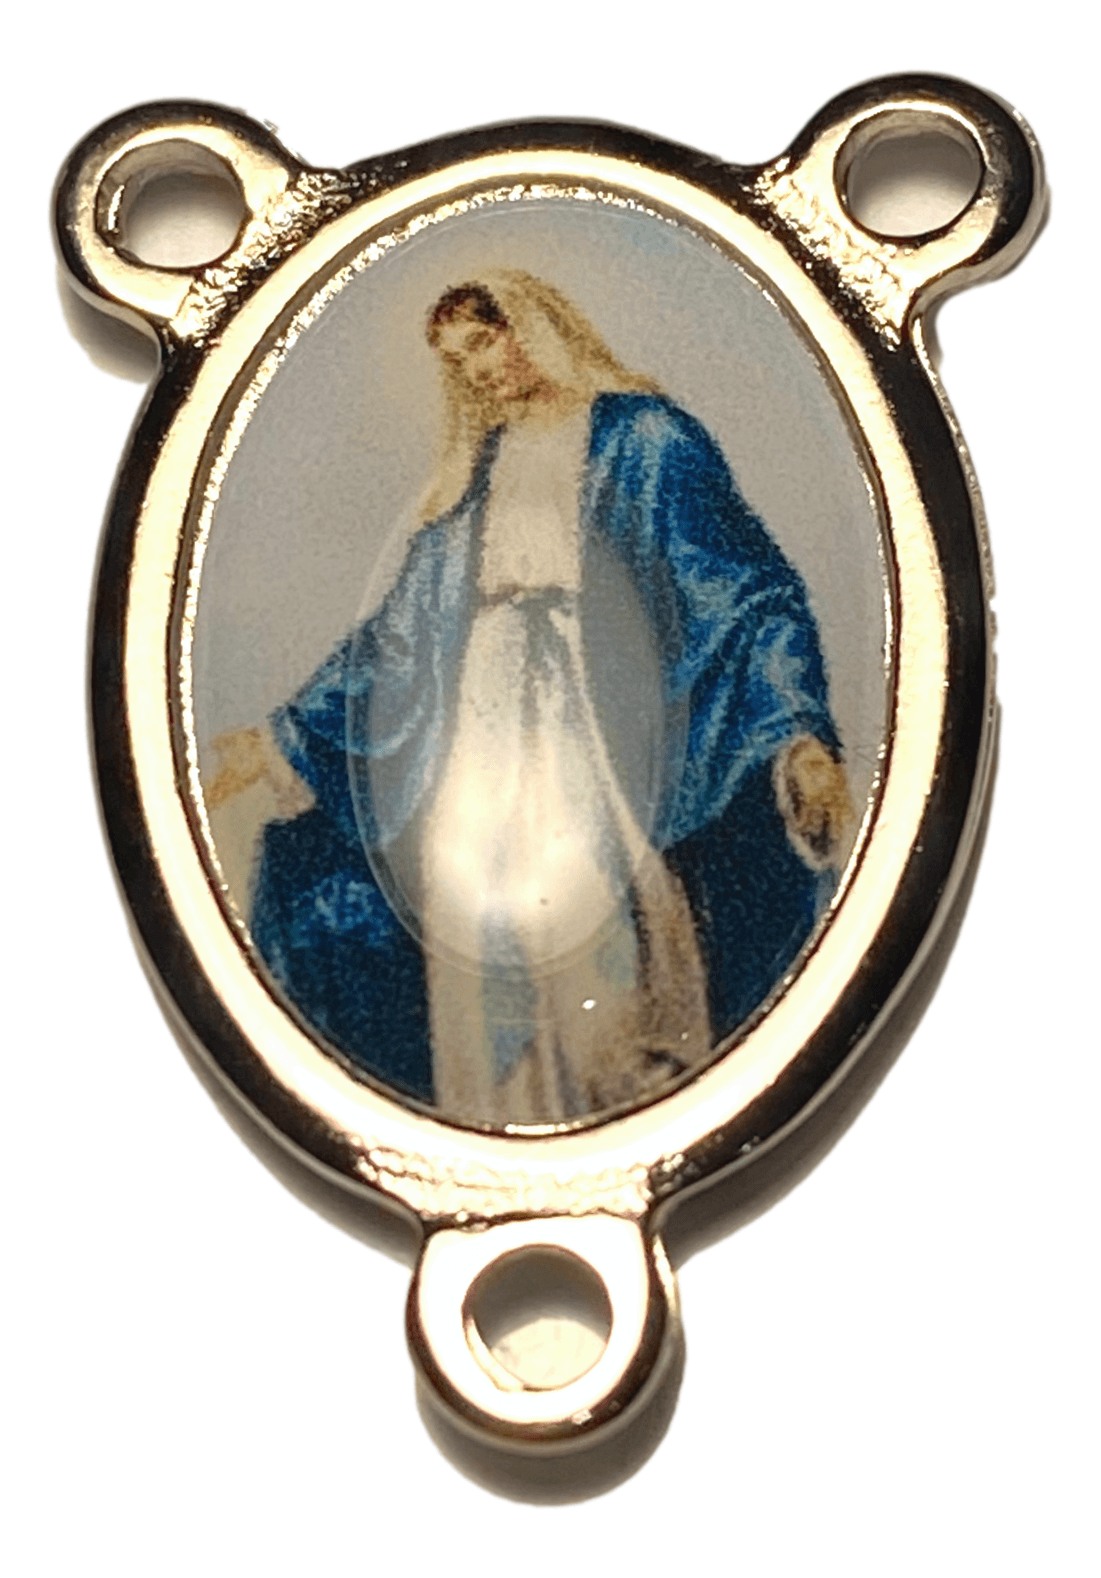 Rosary Parts Our Lady of Grace Colored Center Piece Image Metal Alloy Made in Italy 1 L x 3/4 W Inches - Ysleta Mission Gift Shop- VOTED El Paso's Best Gift Shop